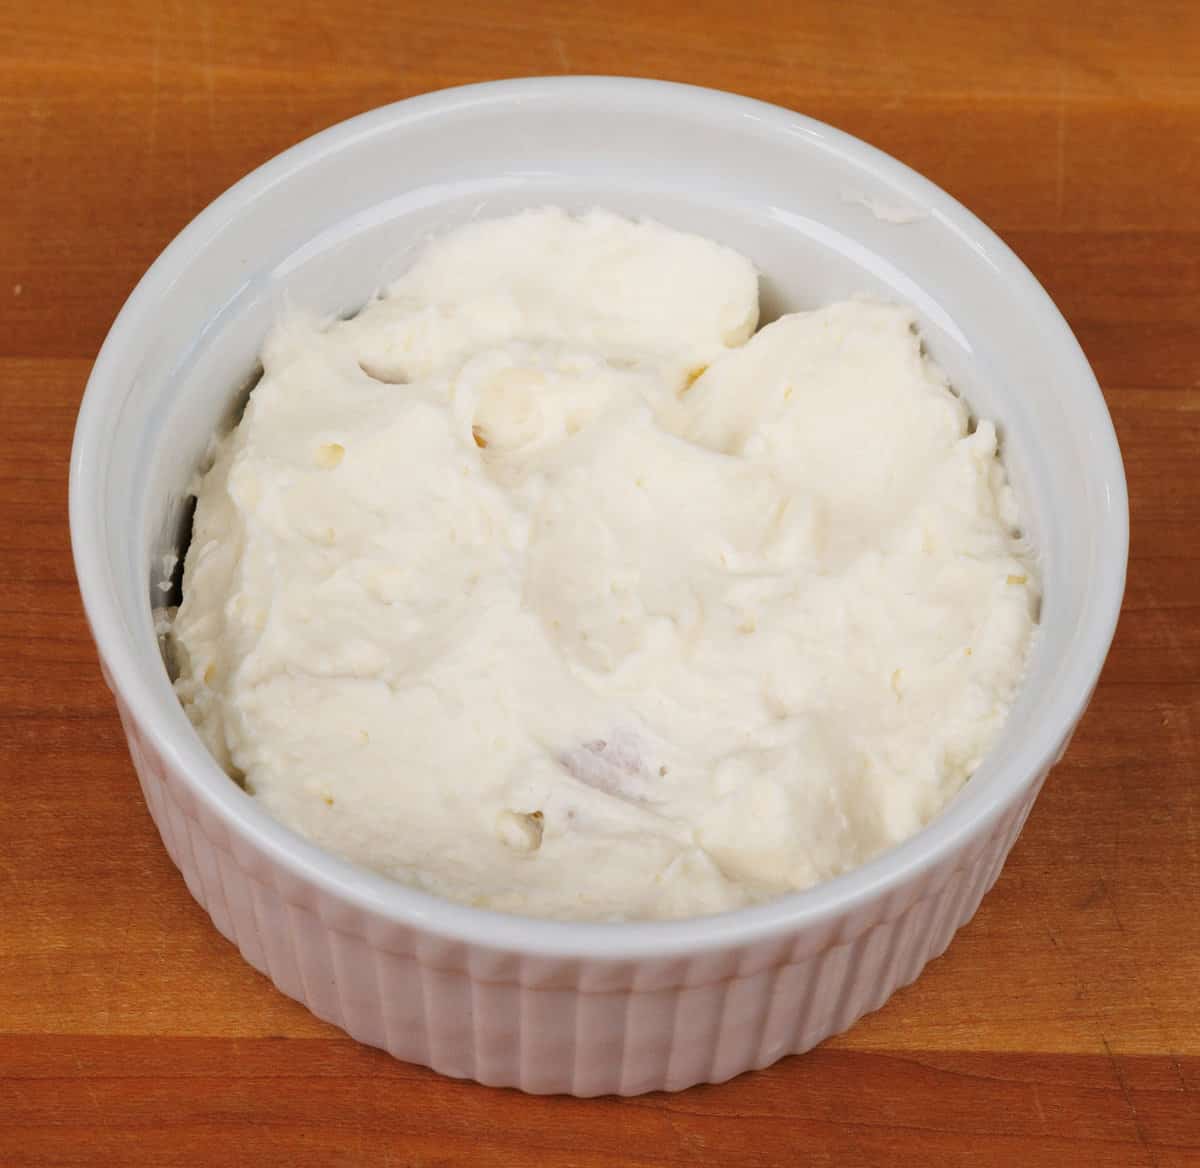 whipped cream spread across graham crackers in a small baking dish.